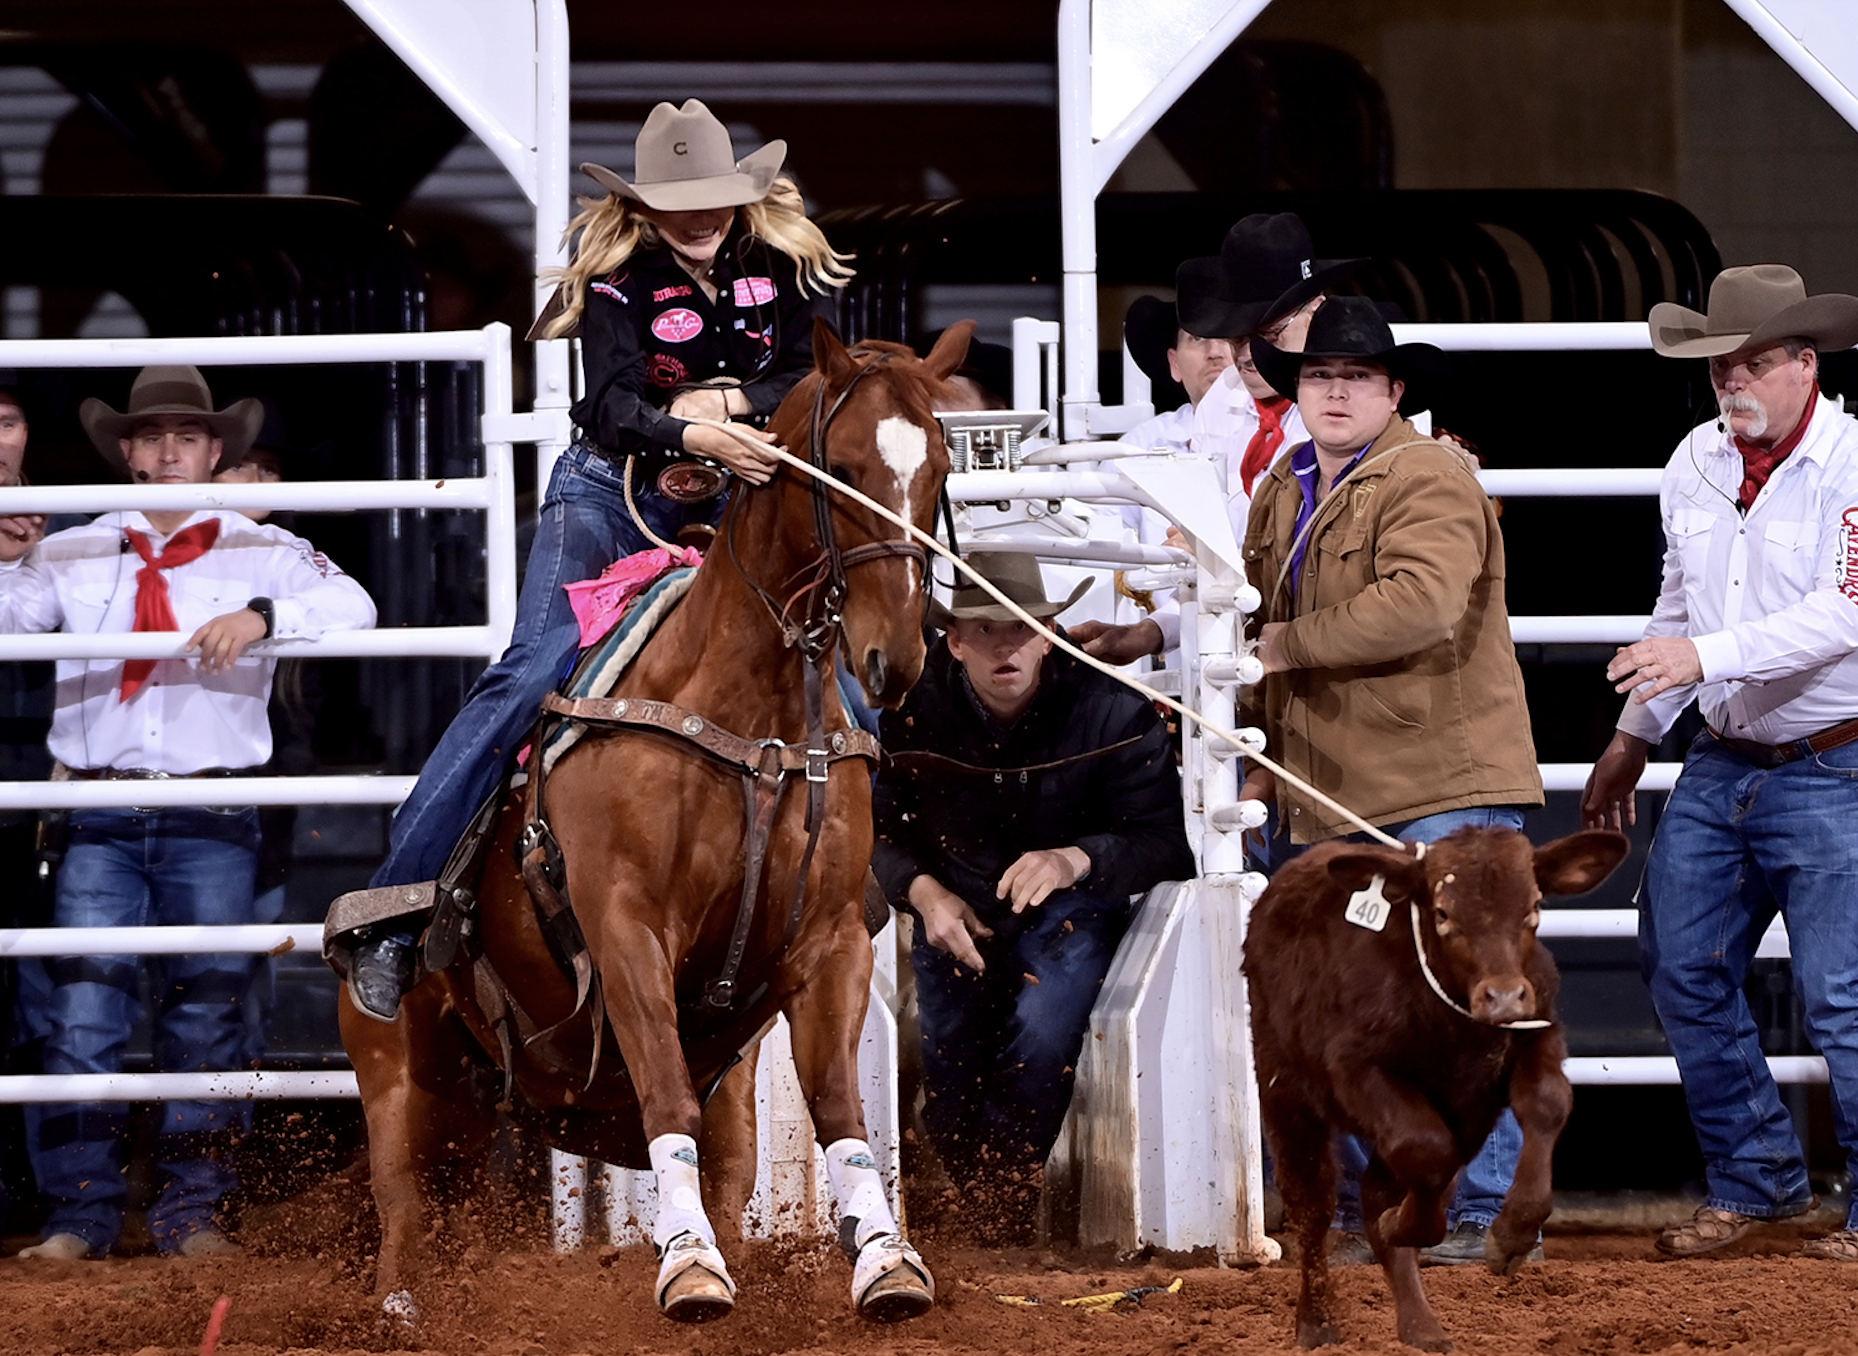 Cheyanne Guillory breakaway roping at the Fort Worth Stock Show & Rodeo.